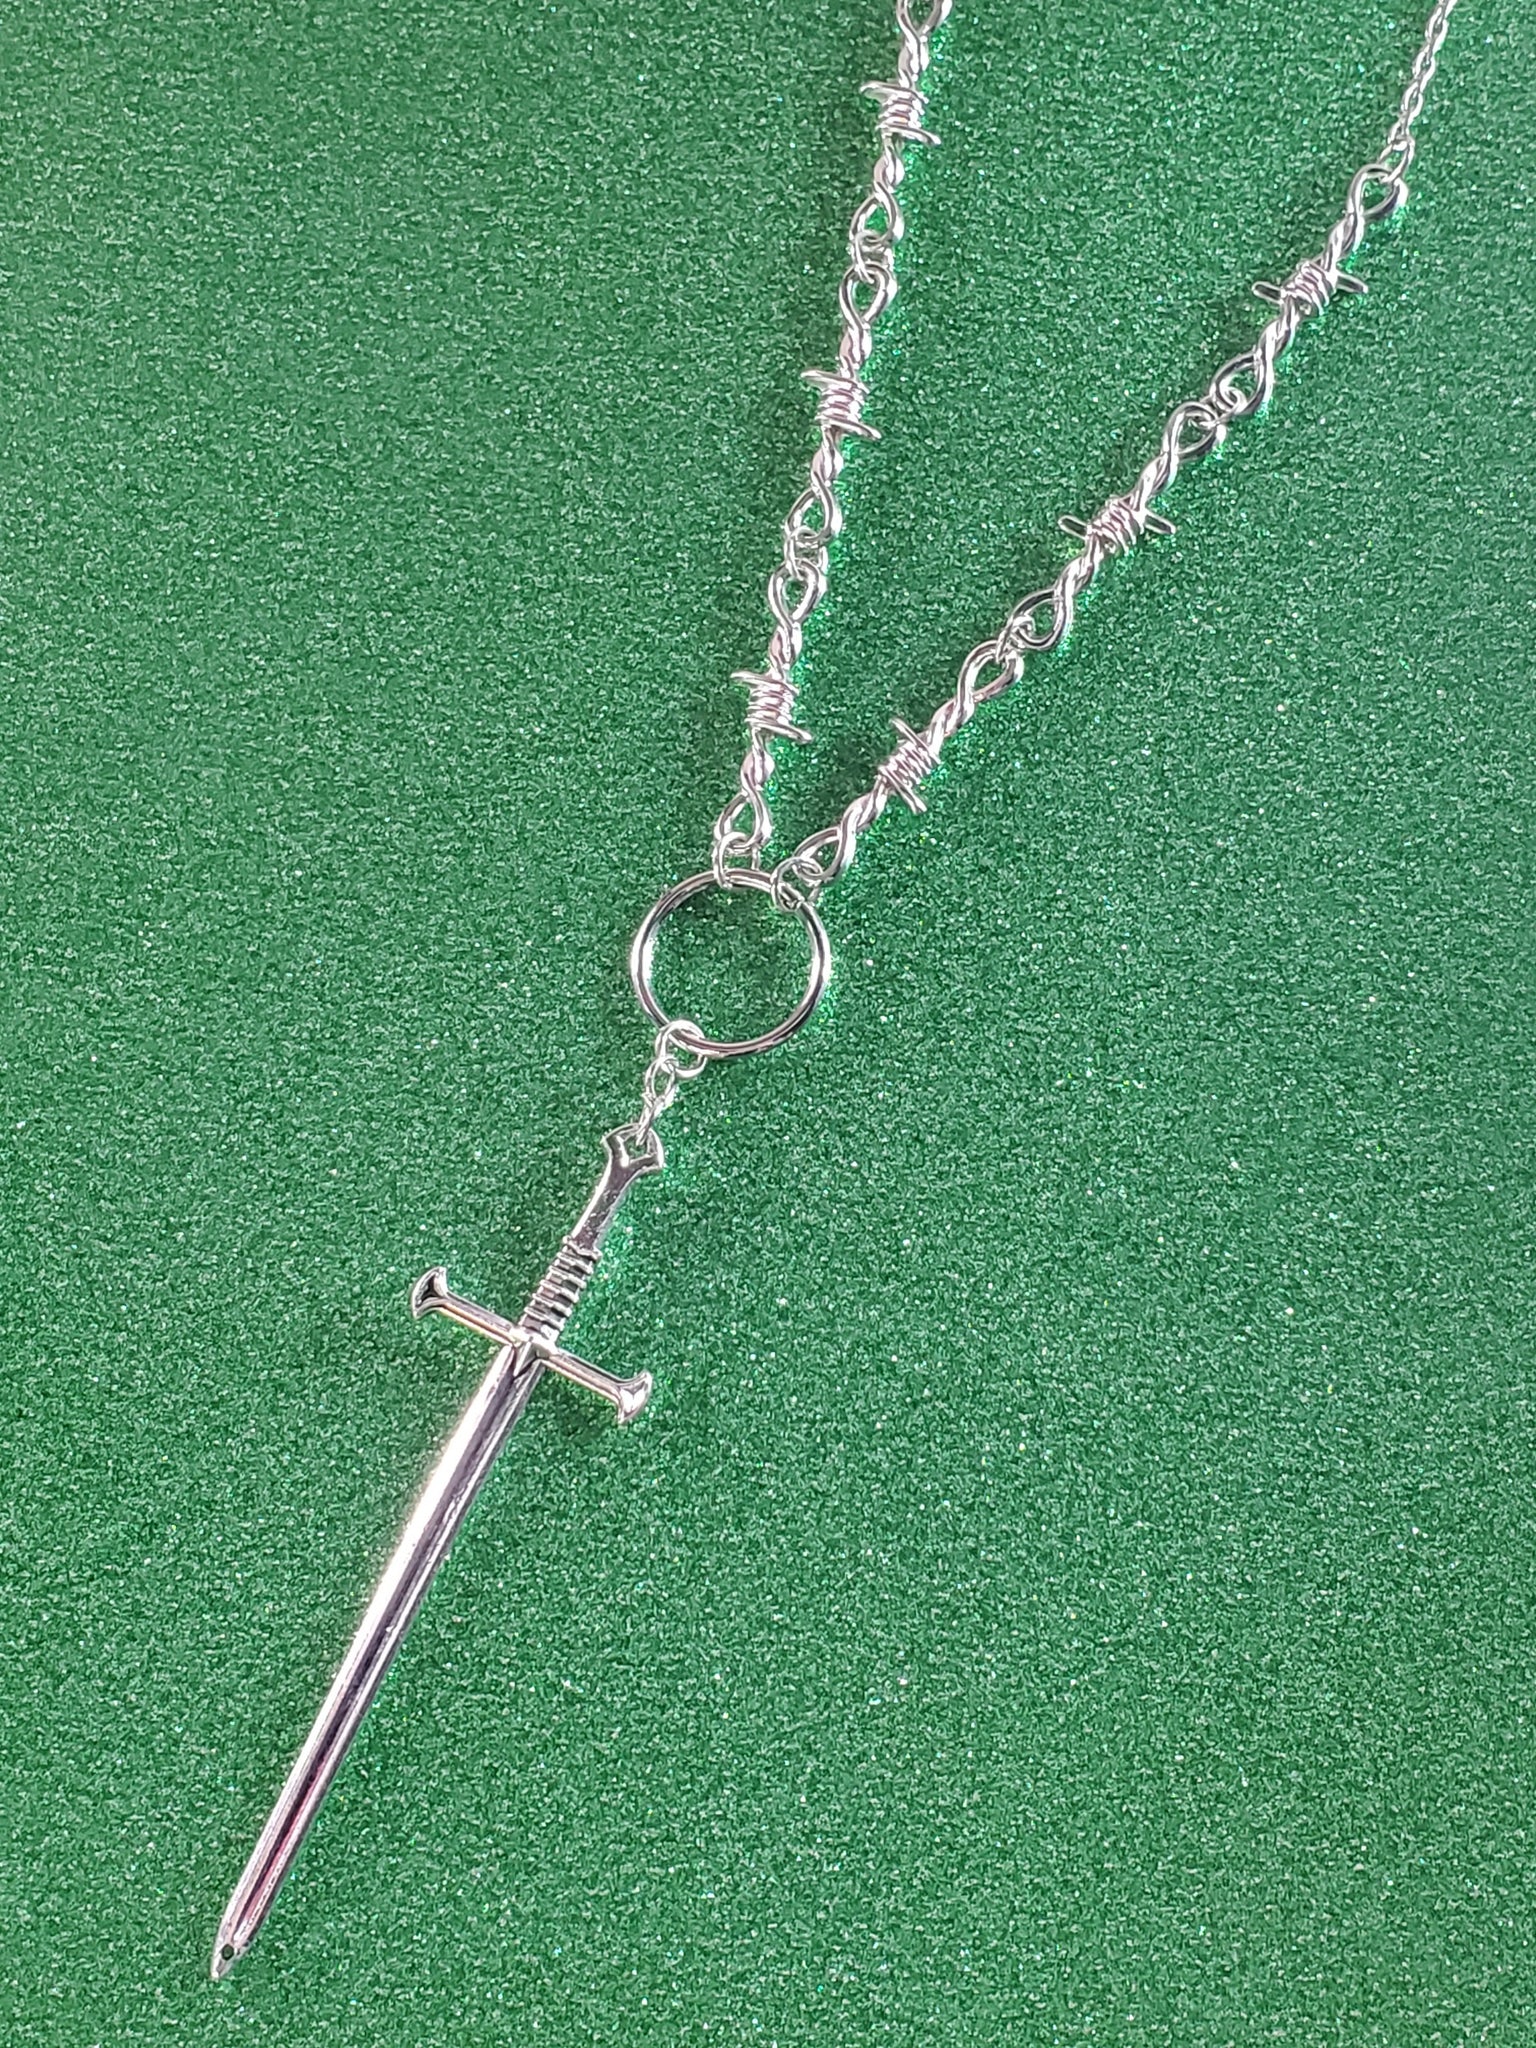 24” silver metal barbed wire necklace with a sword charm connected by a metal o ring. showing close up view of pendant